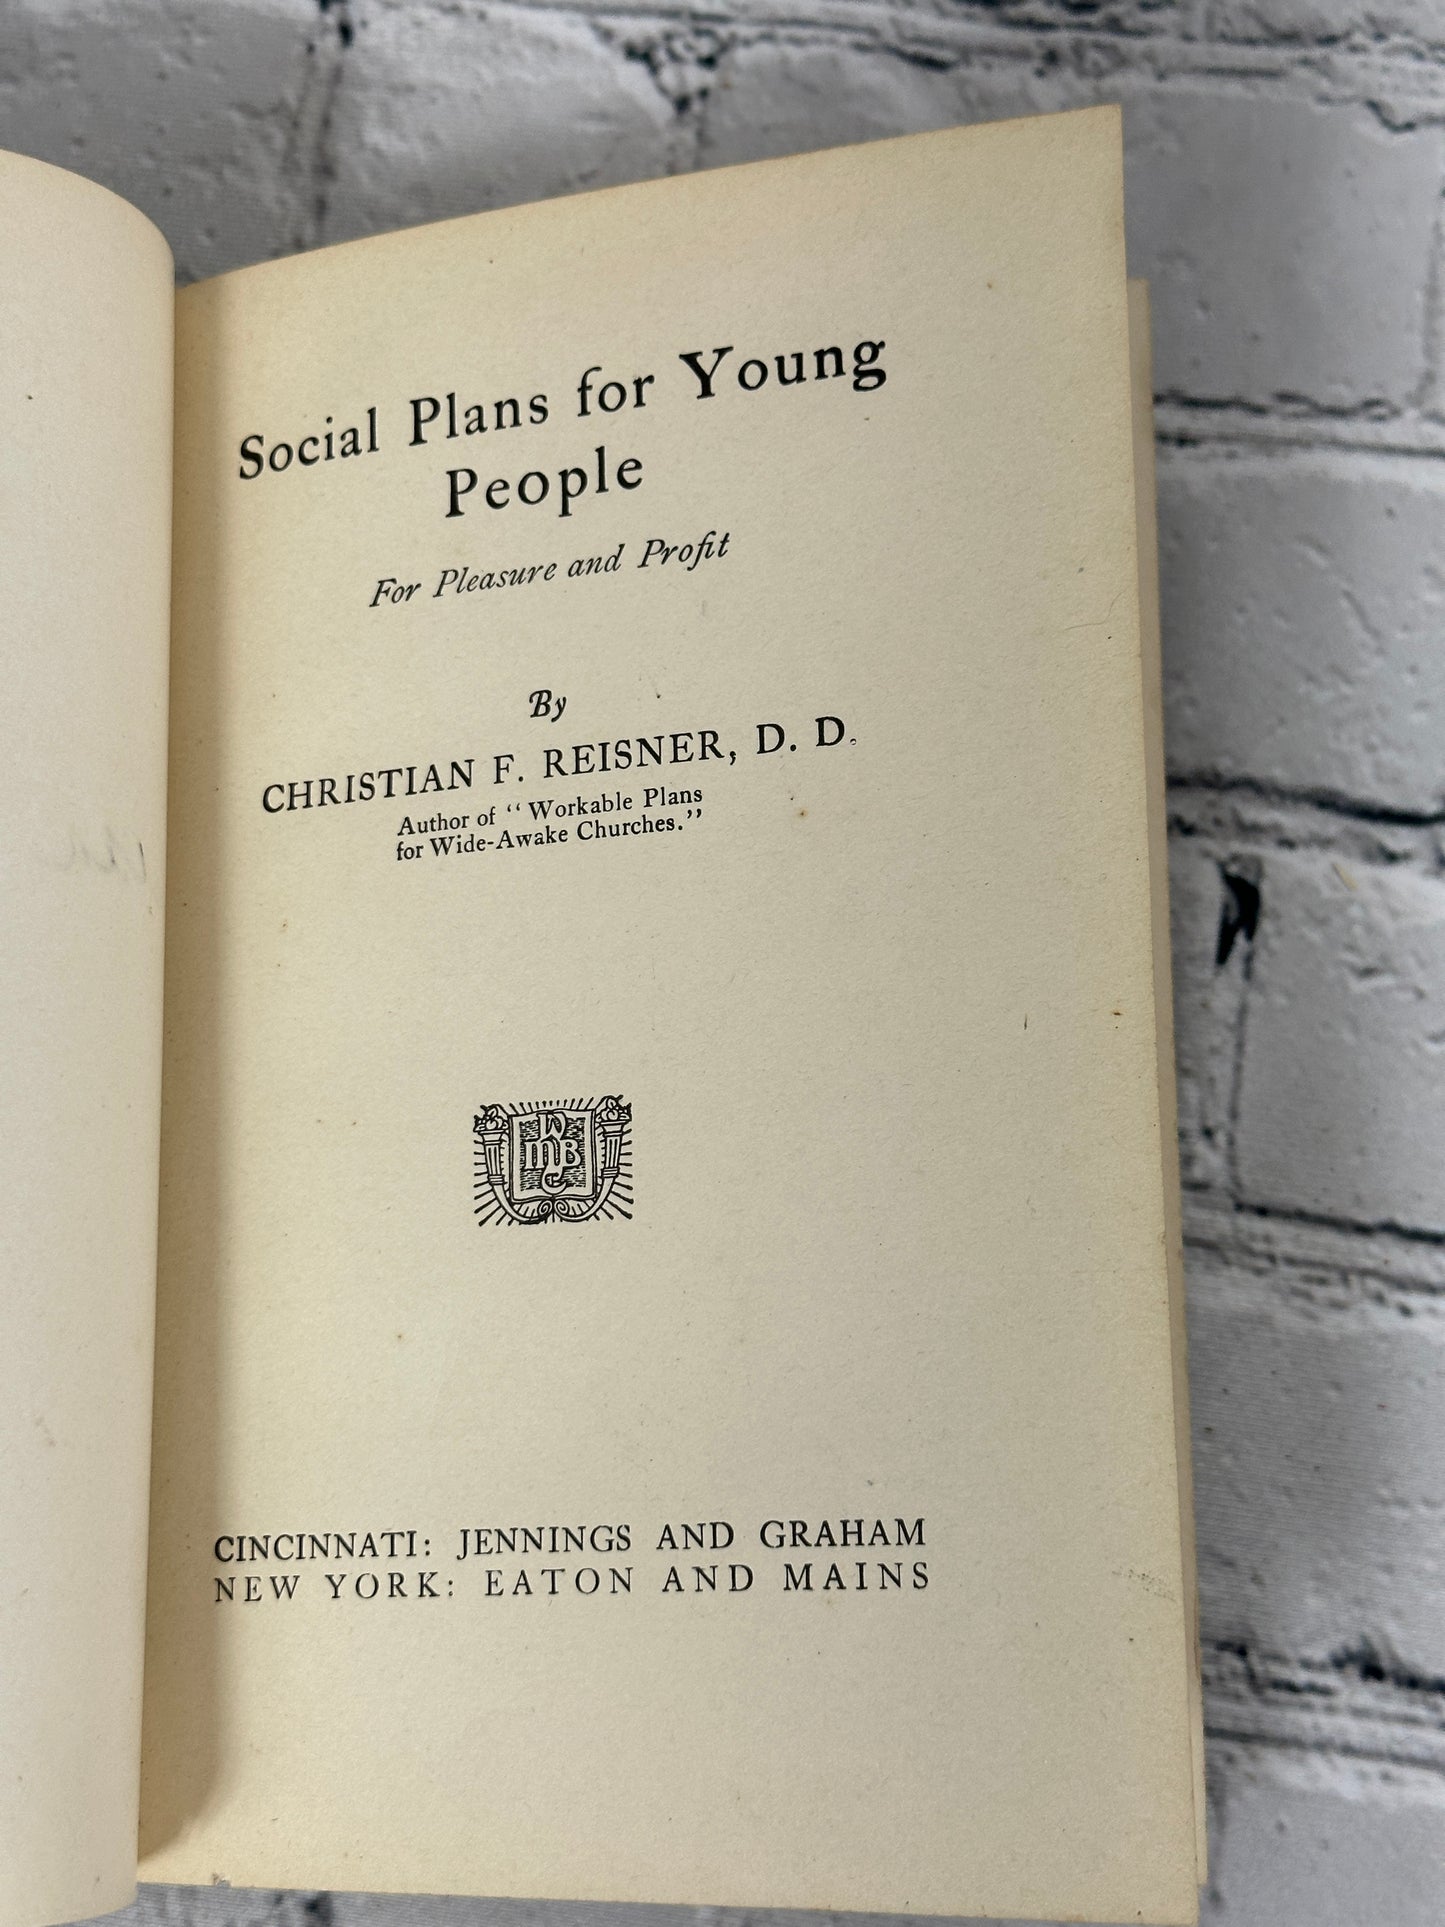 Social Plans for Young People by Christian F. Reisner [1908]